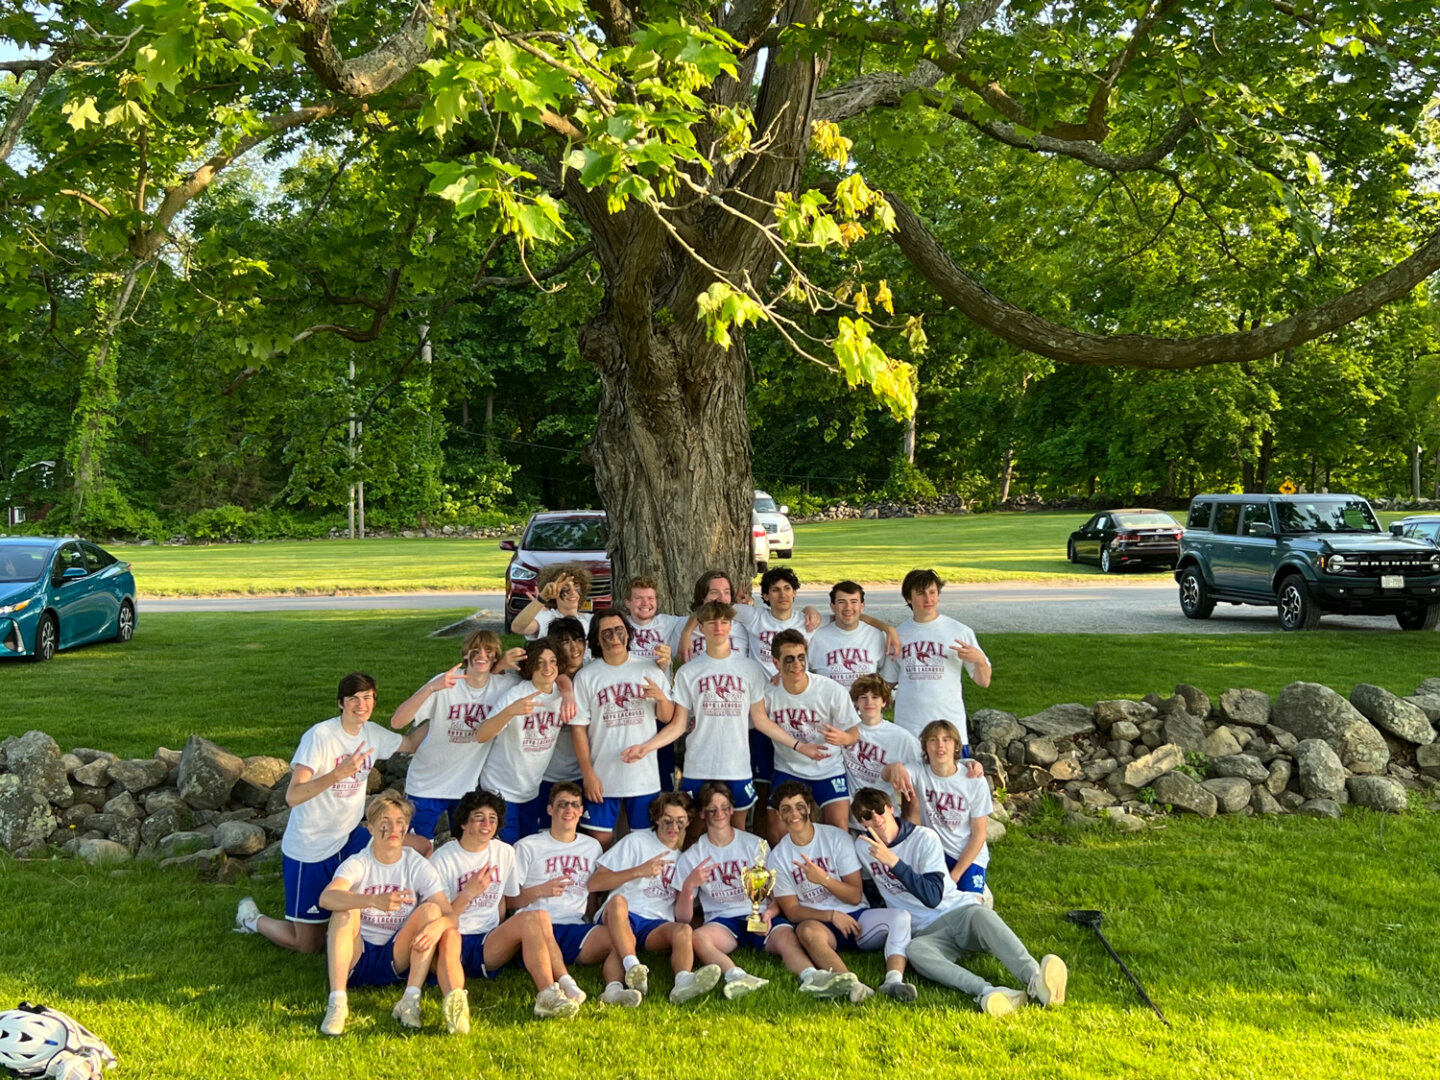 Williams School boys lacrosse team pose in front of a large tree in their HVAL shirts